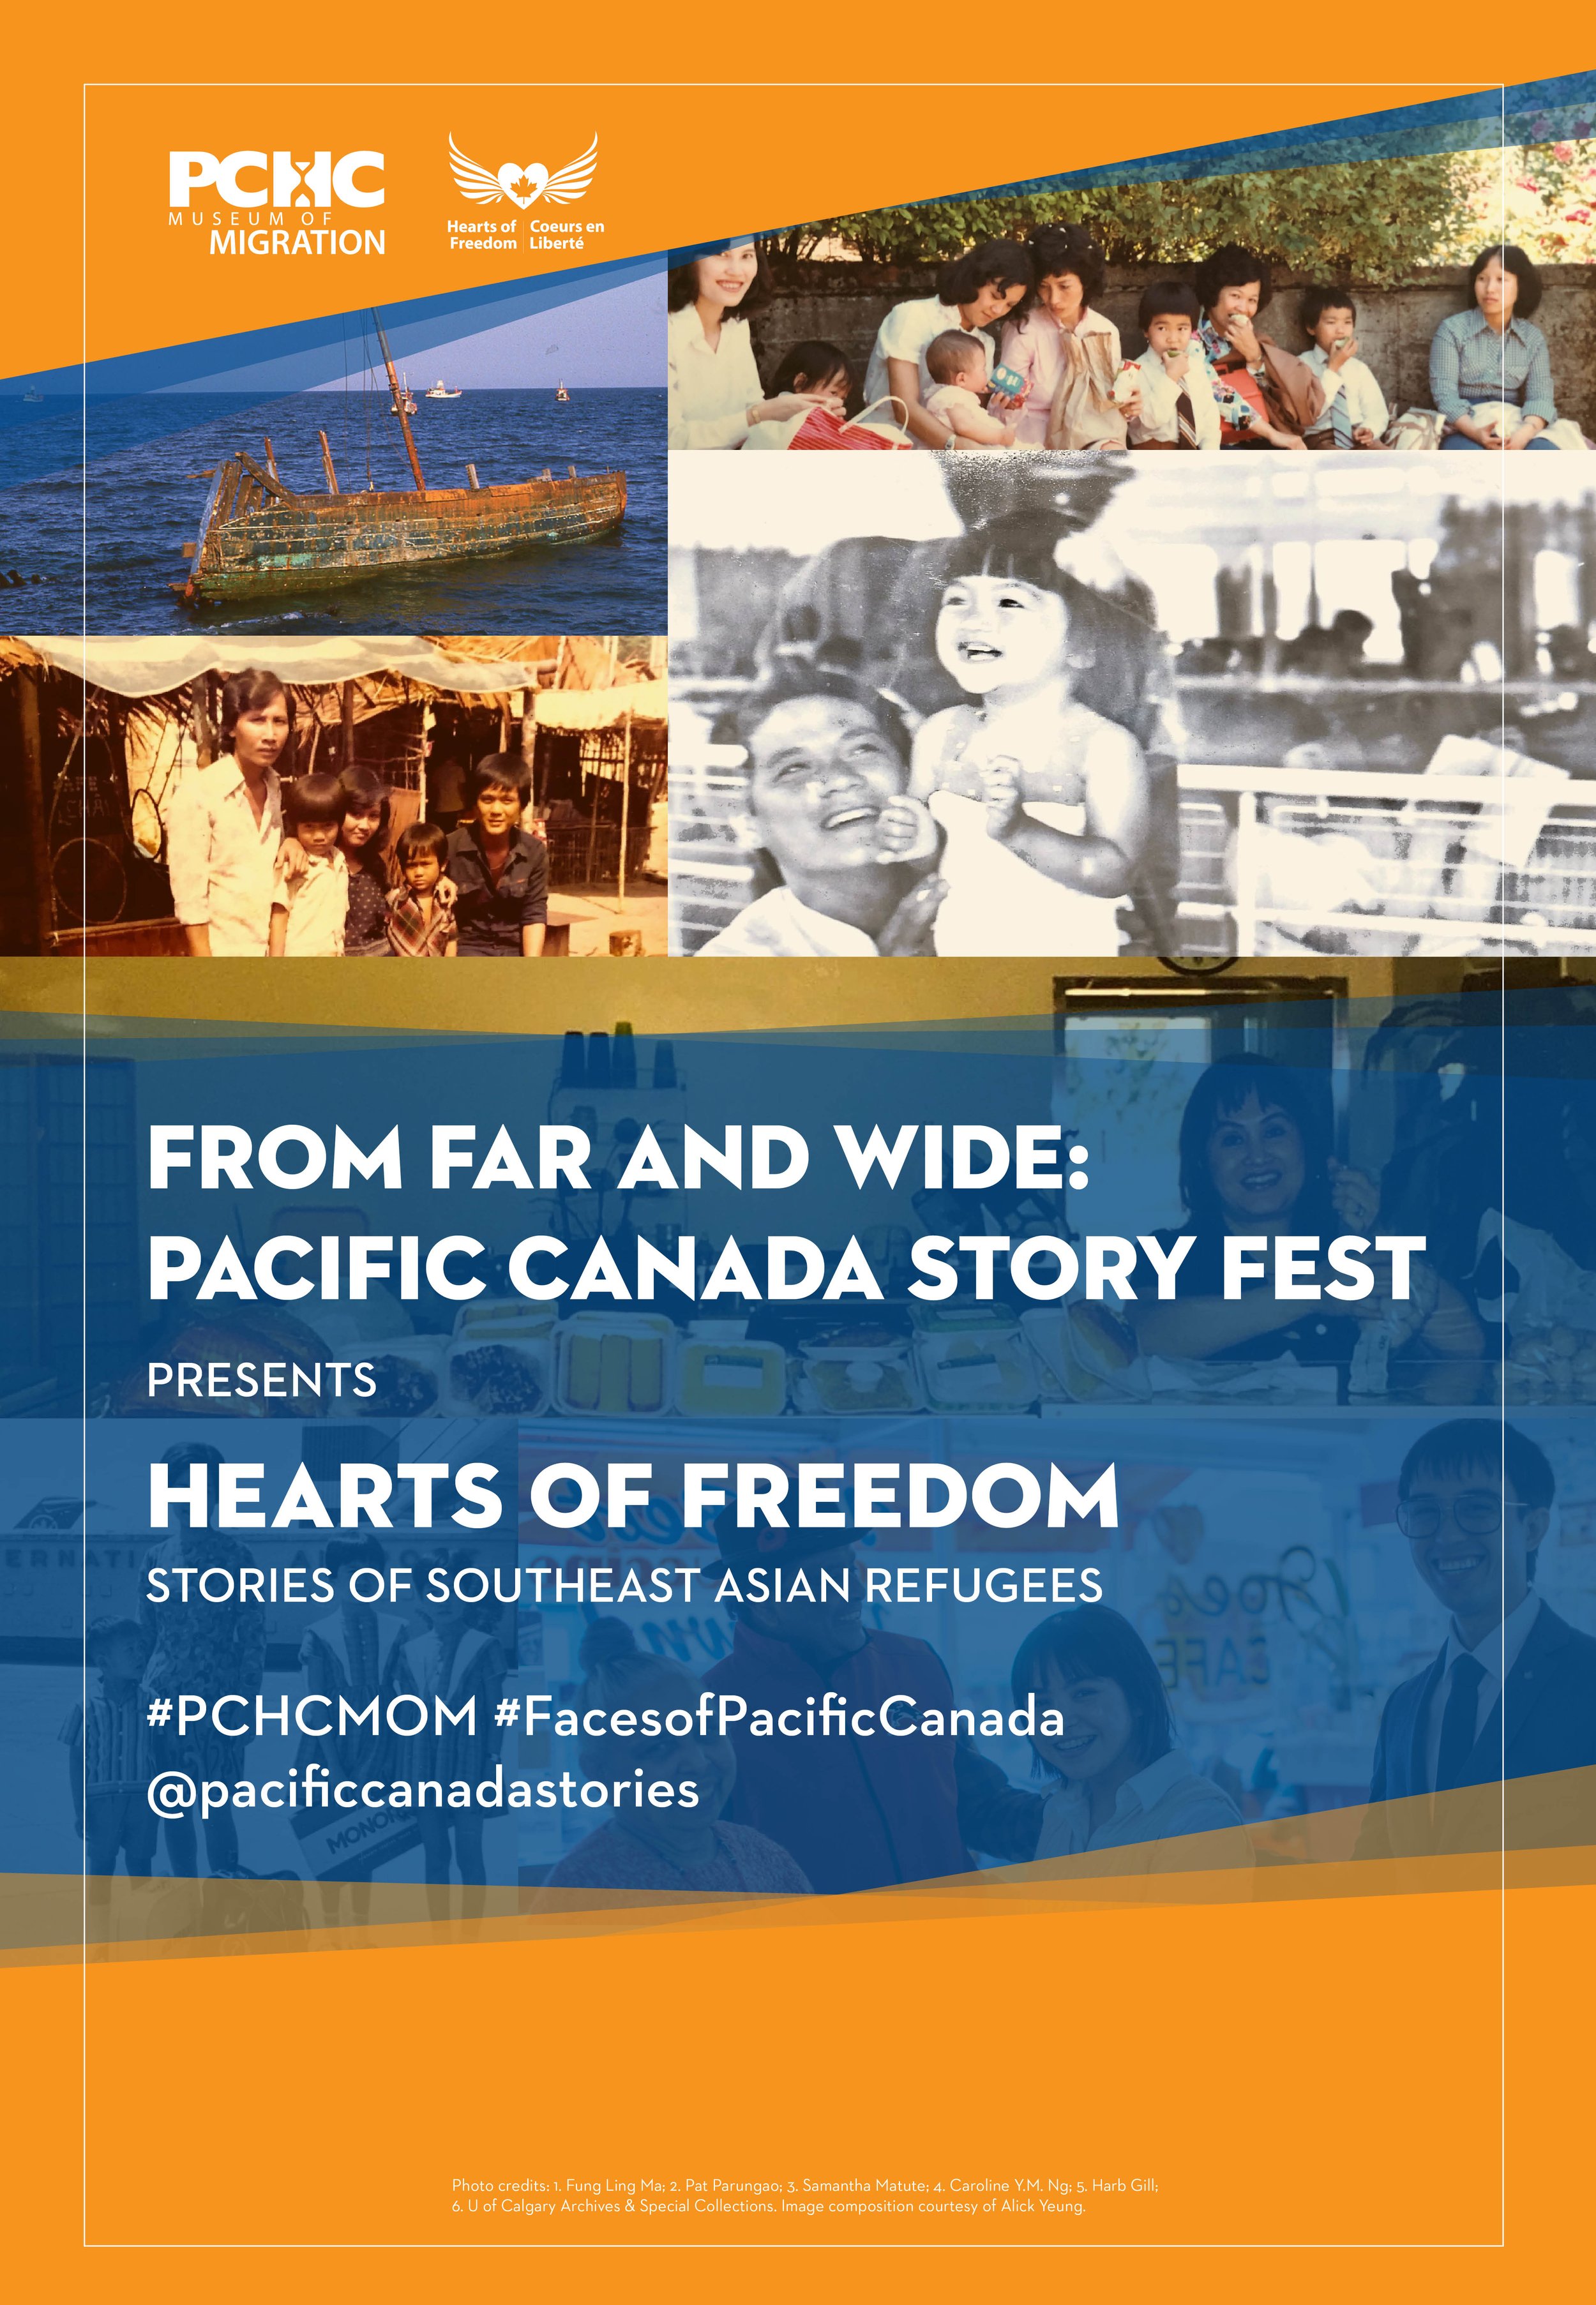 Pacific Canada Stories Festival Hearts of Freedom_Bus Shelter1.jpg